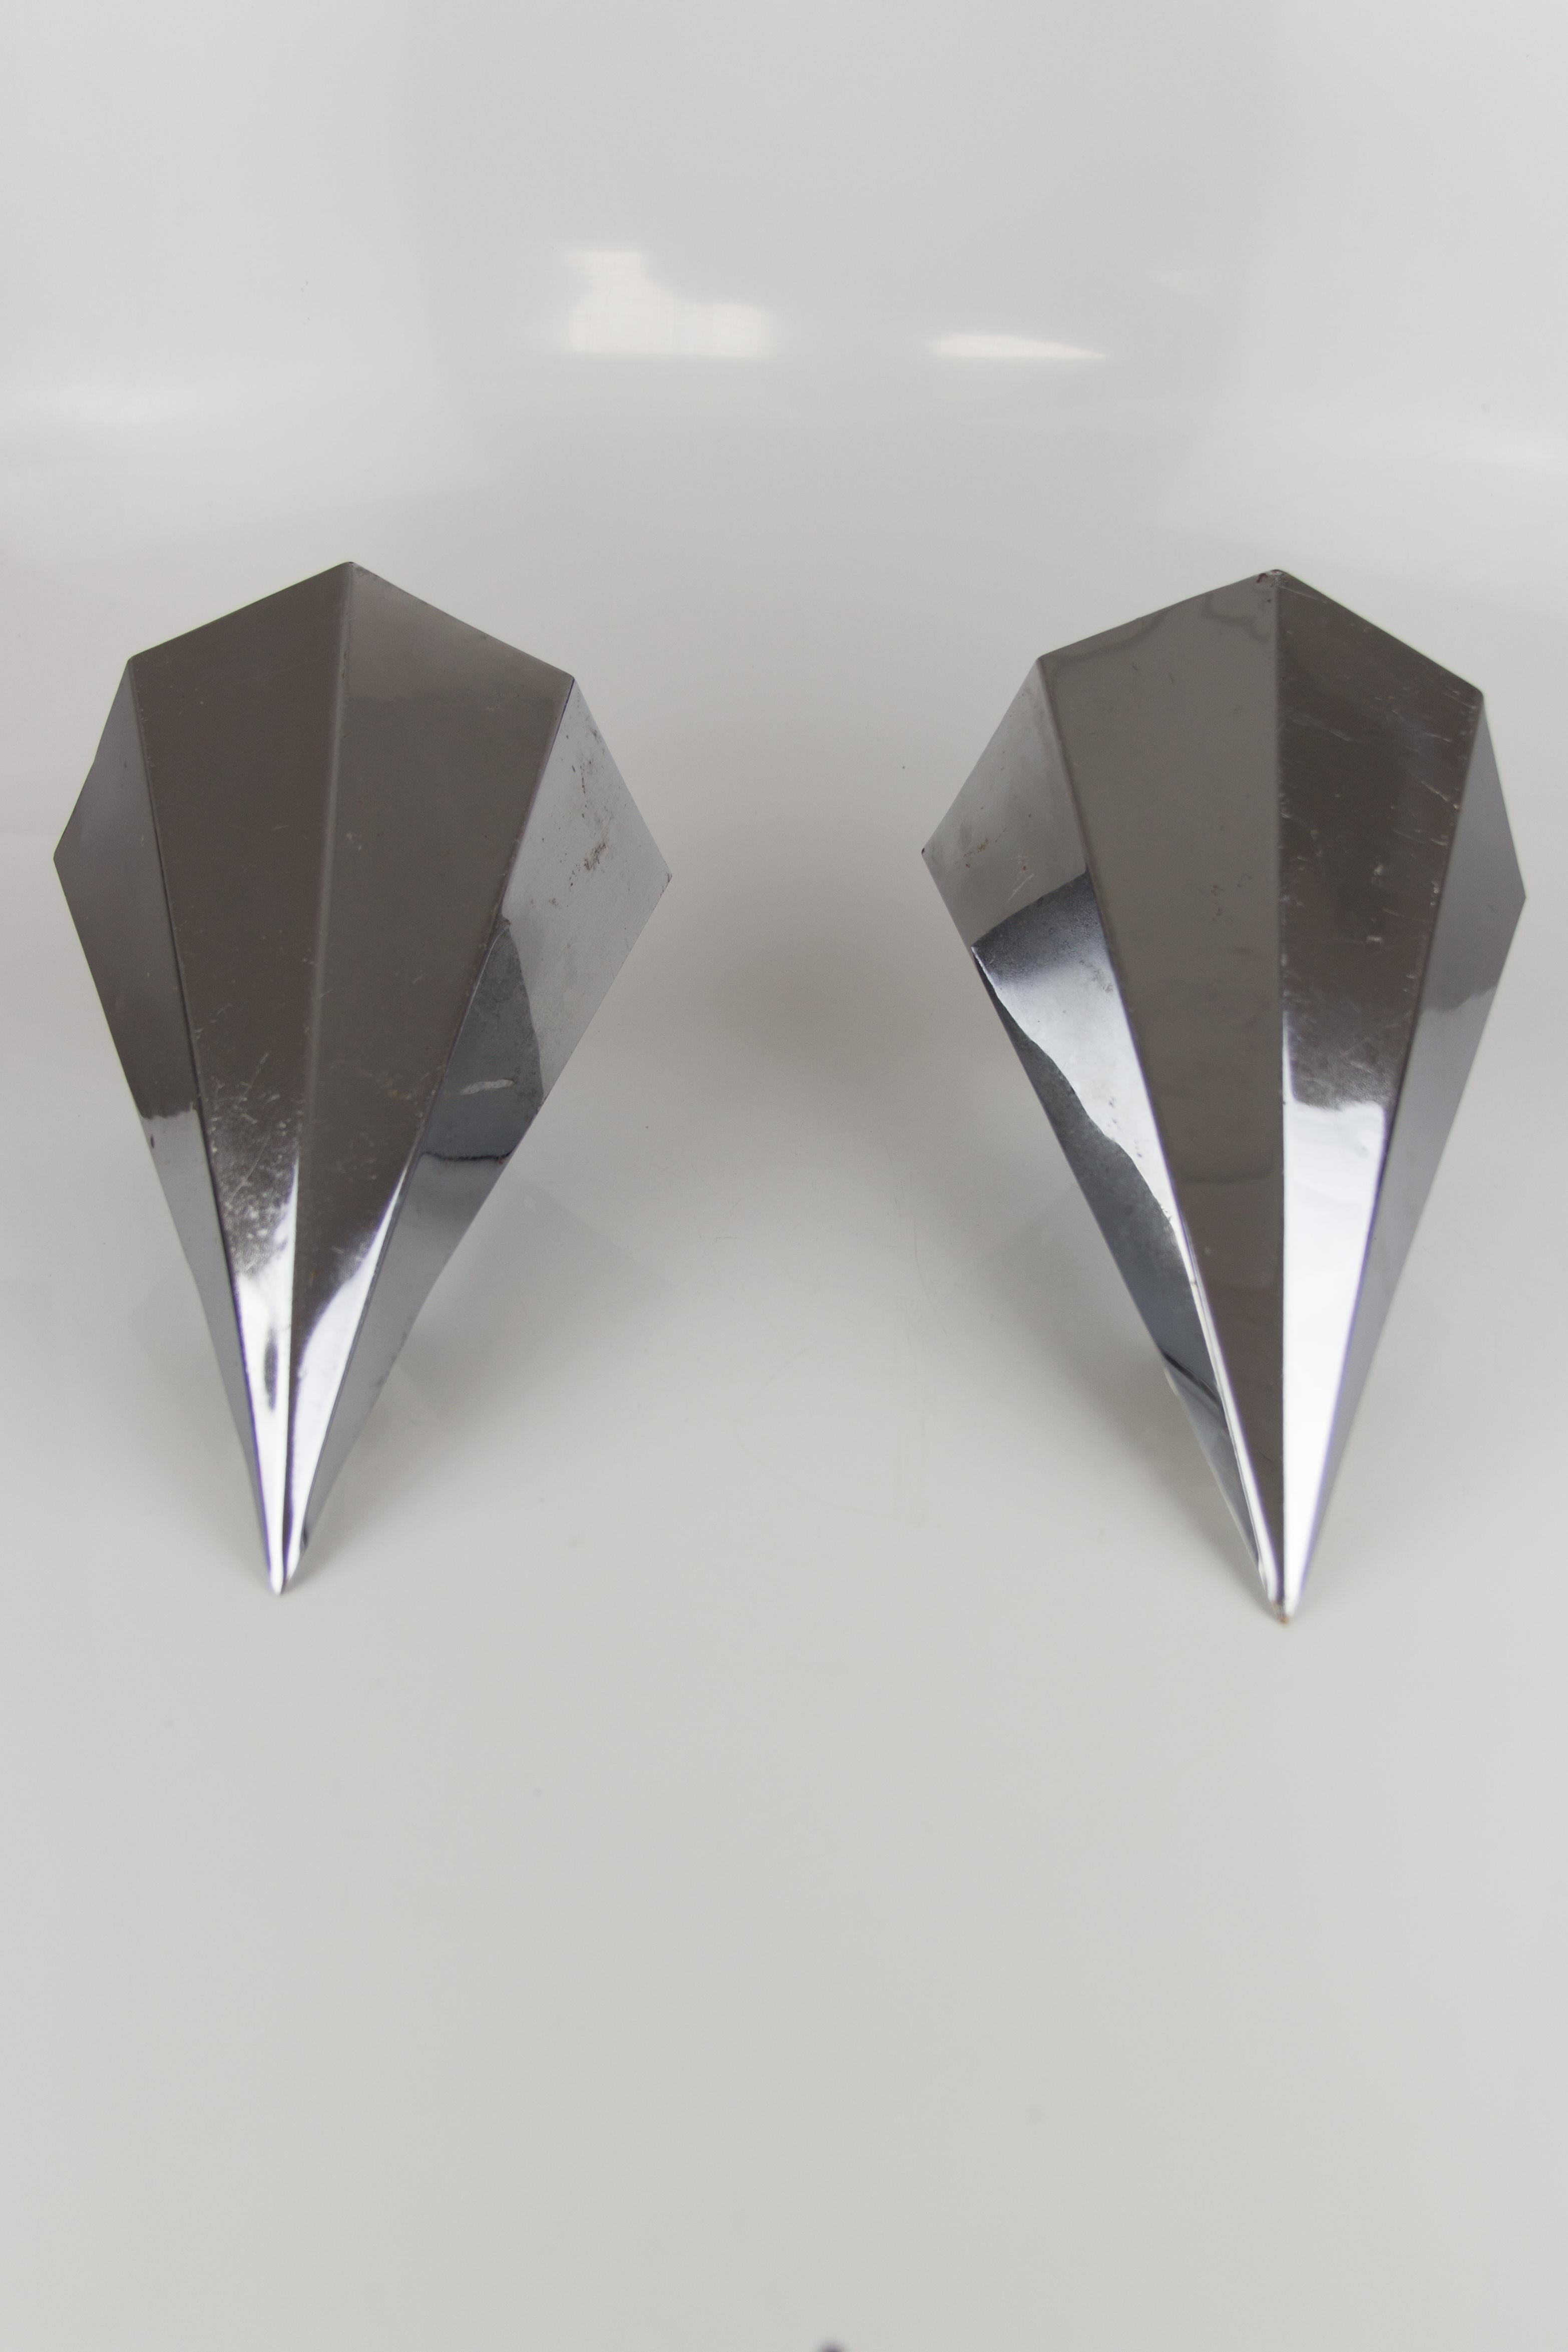 Pair of Art Deco Nickel-Plated Metal Prism Corner Wall Sconces, France, 1920s For Sale 11